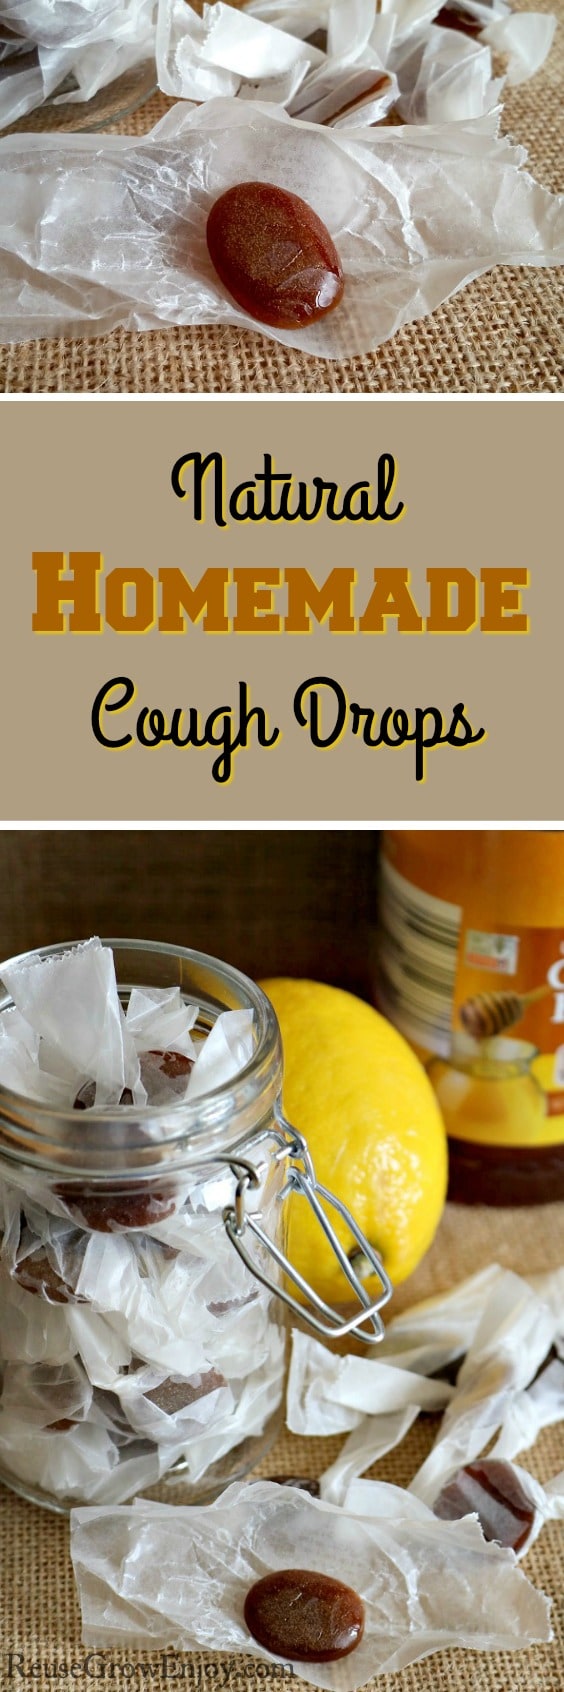 Looking for a more natural way to take care of a cough? Check out this easy to make Natural Homemade Cough Drops!